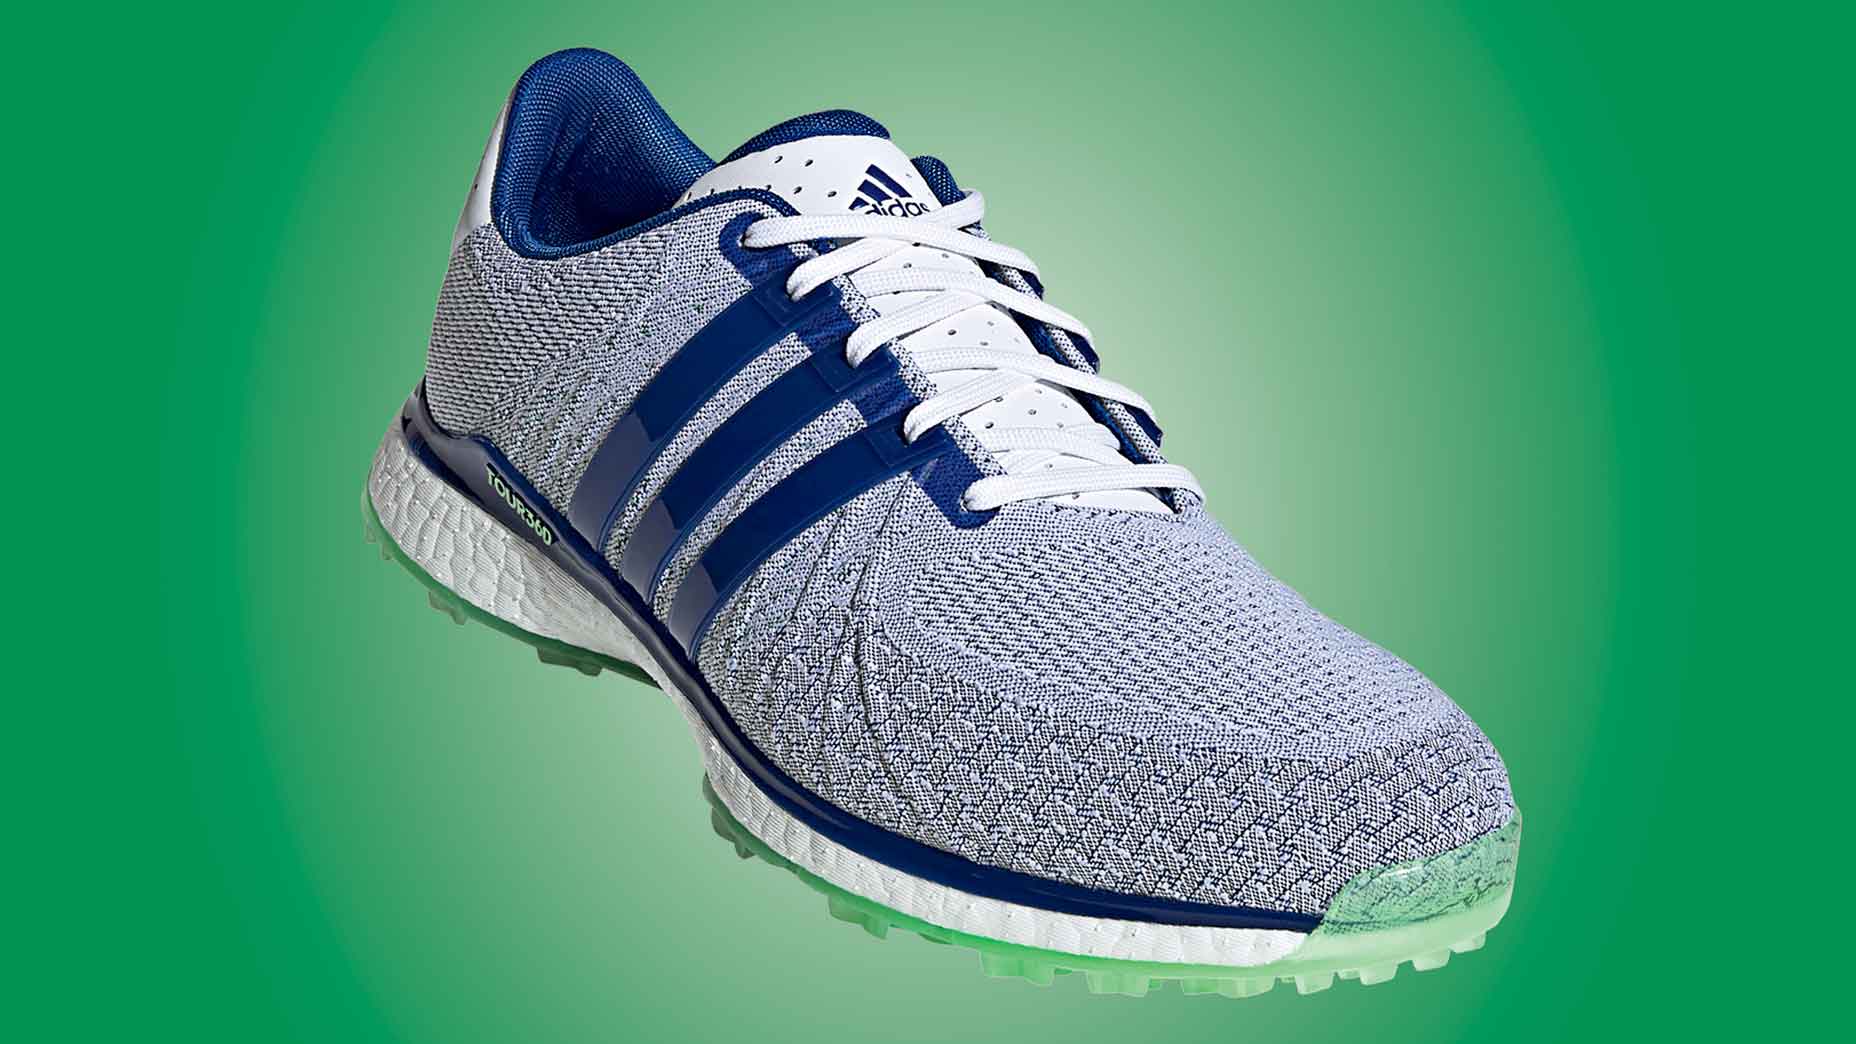 Accompany Our company Honest These Adidas golf shoes can conquer the worst weather on the course